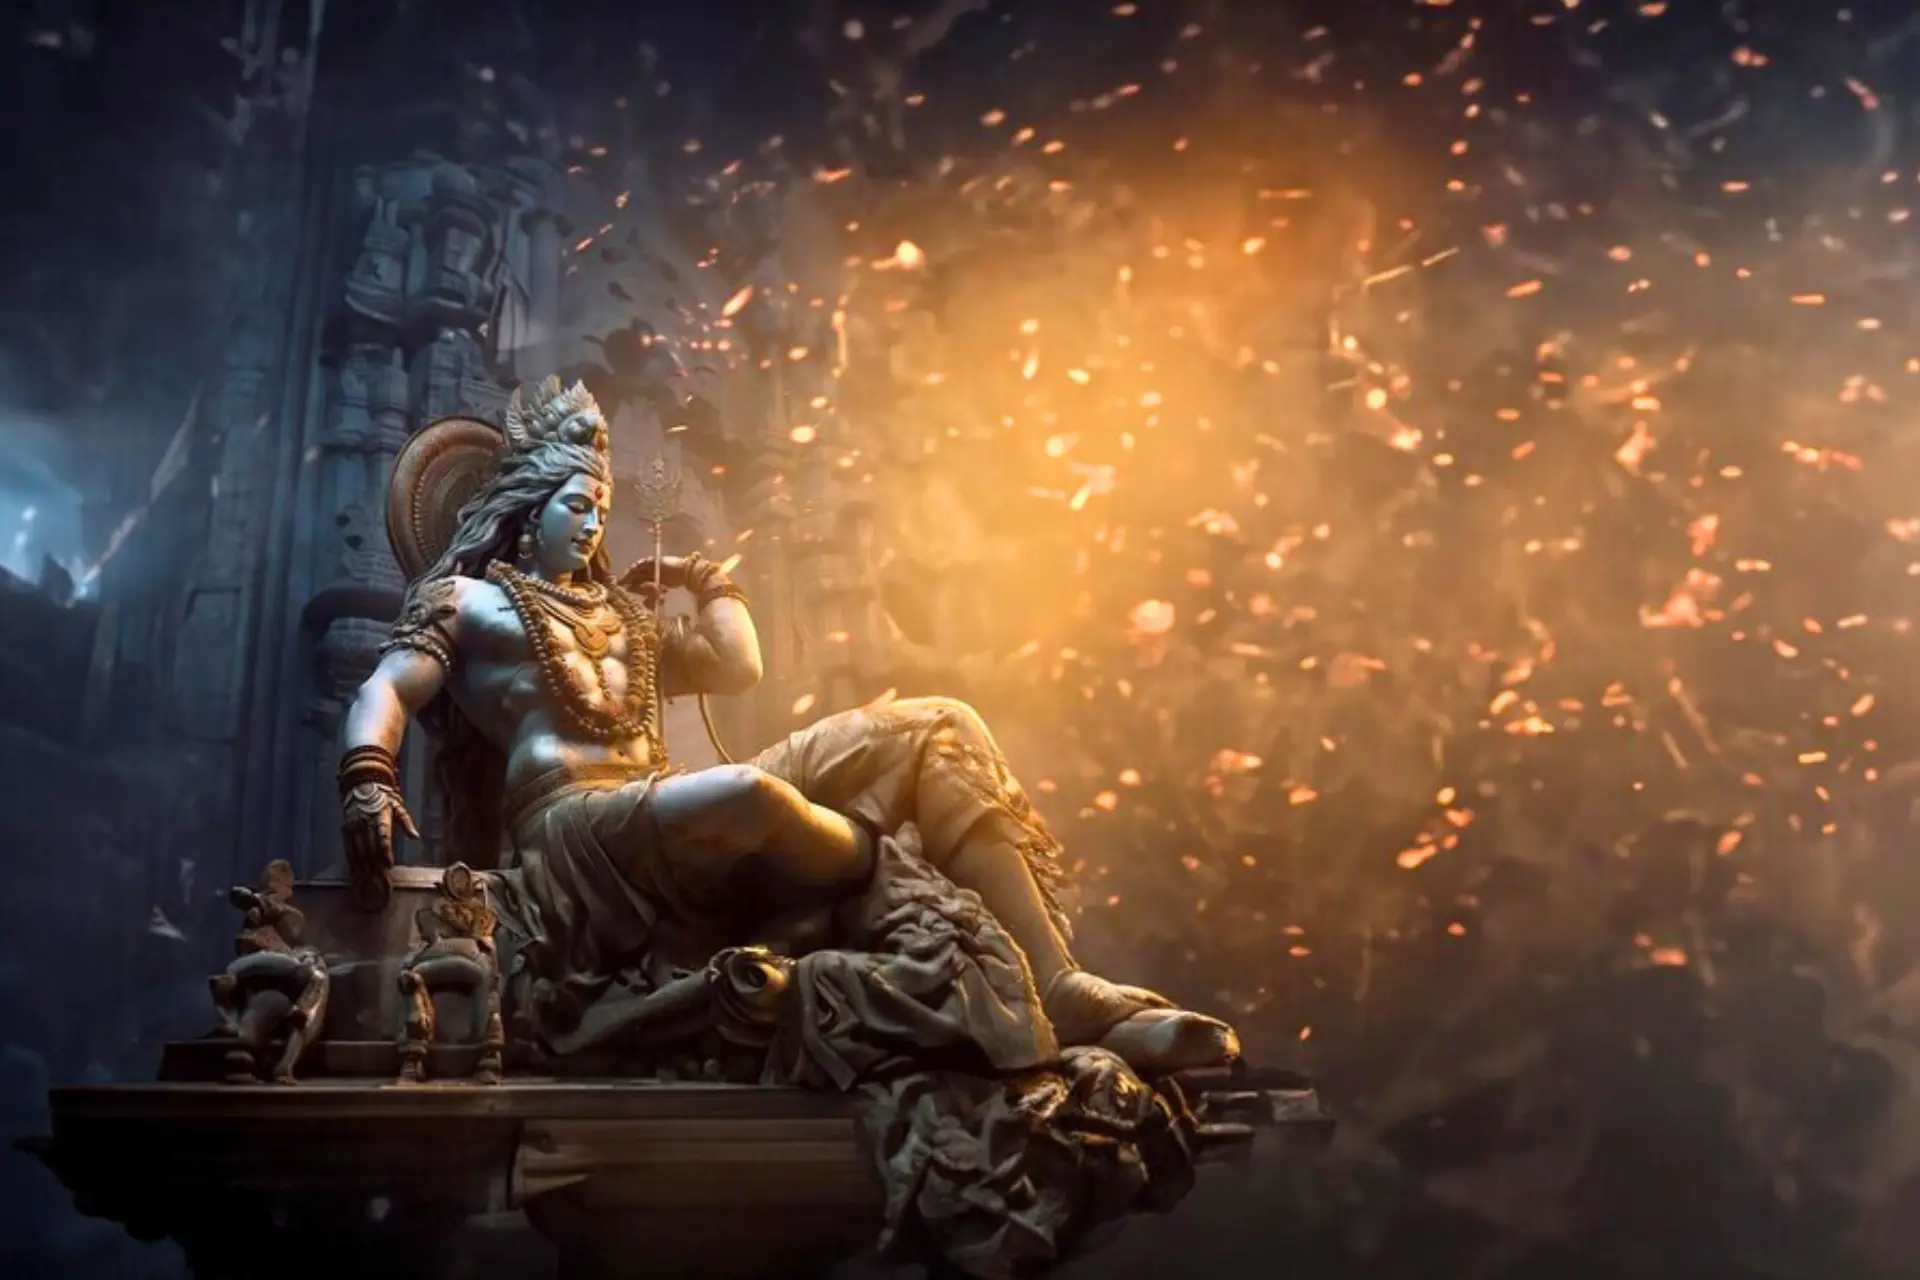 Lord Shiva: The Complexities of Creation and Destruction